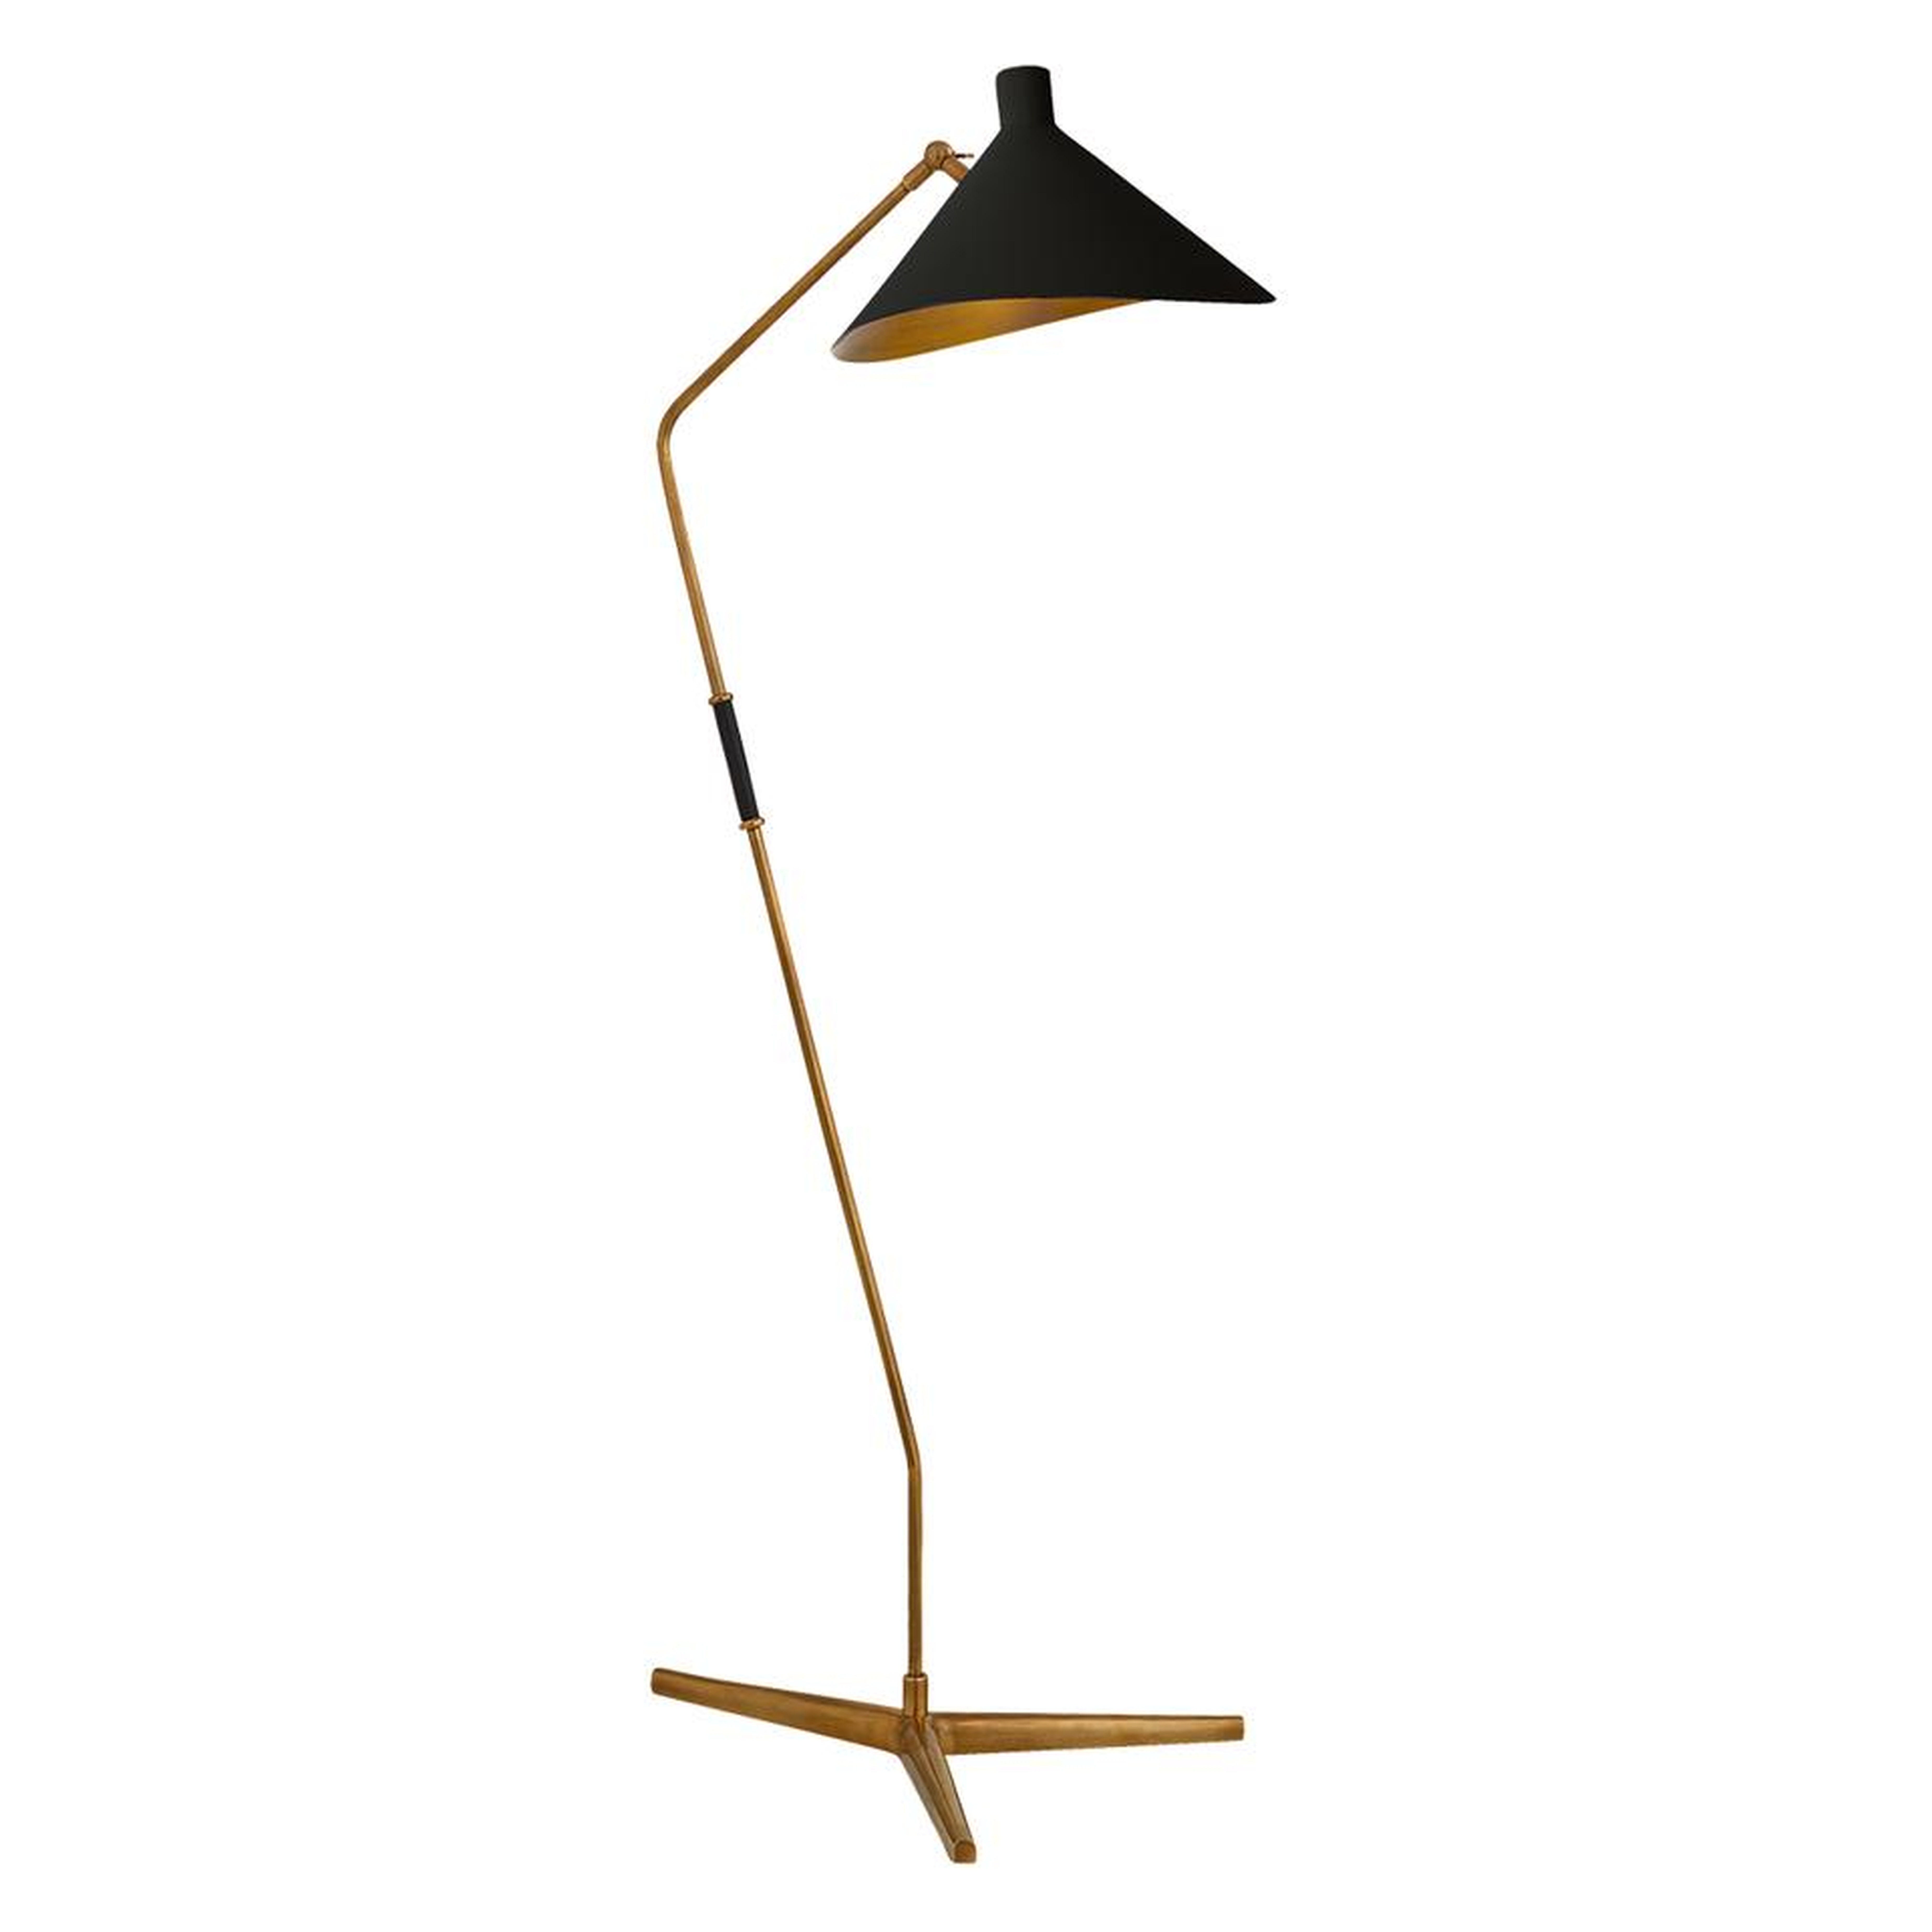 MAYOTTE OFFSET FLOOR LAMP - BLACK - McGee & Co.